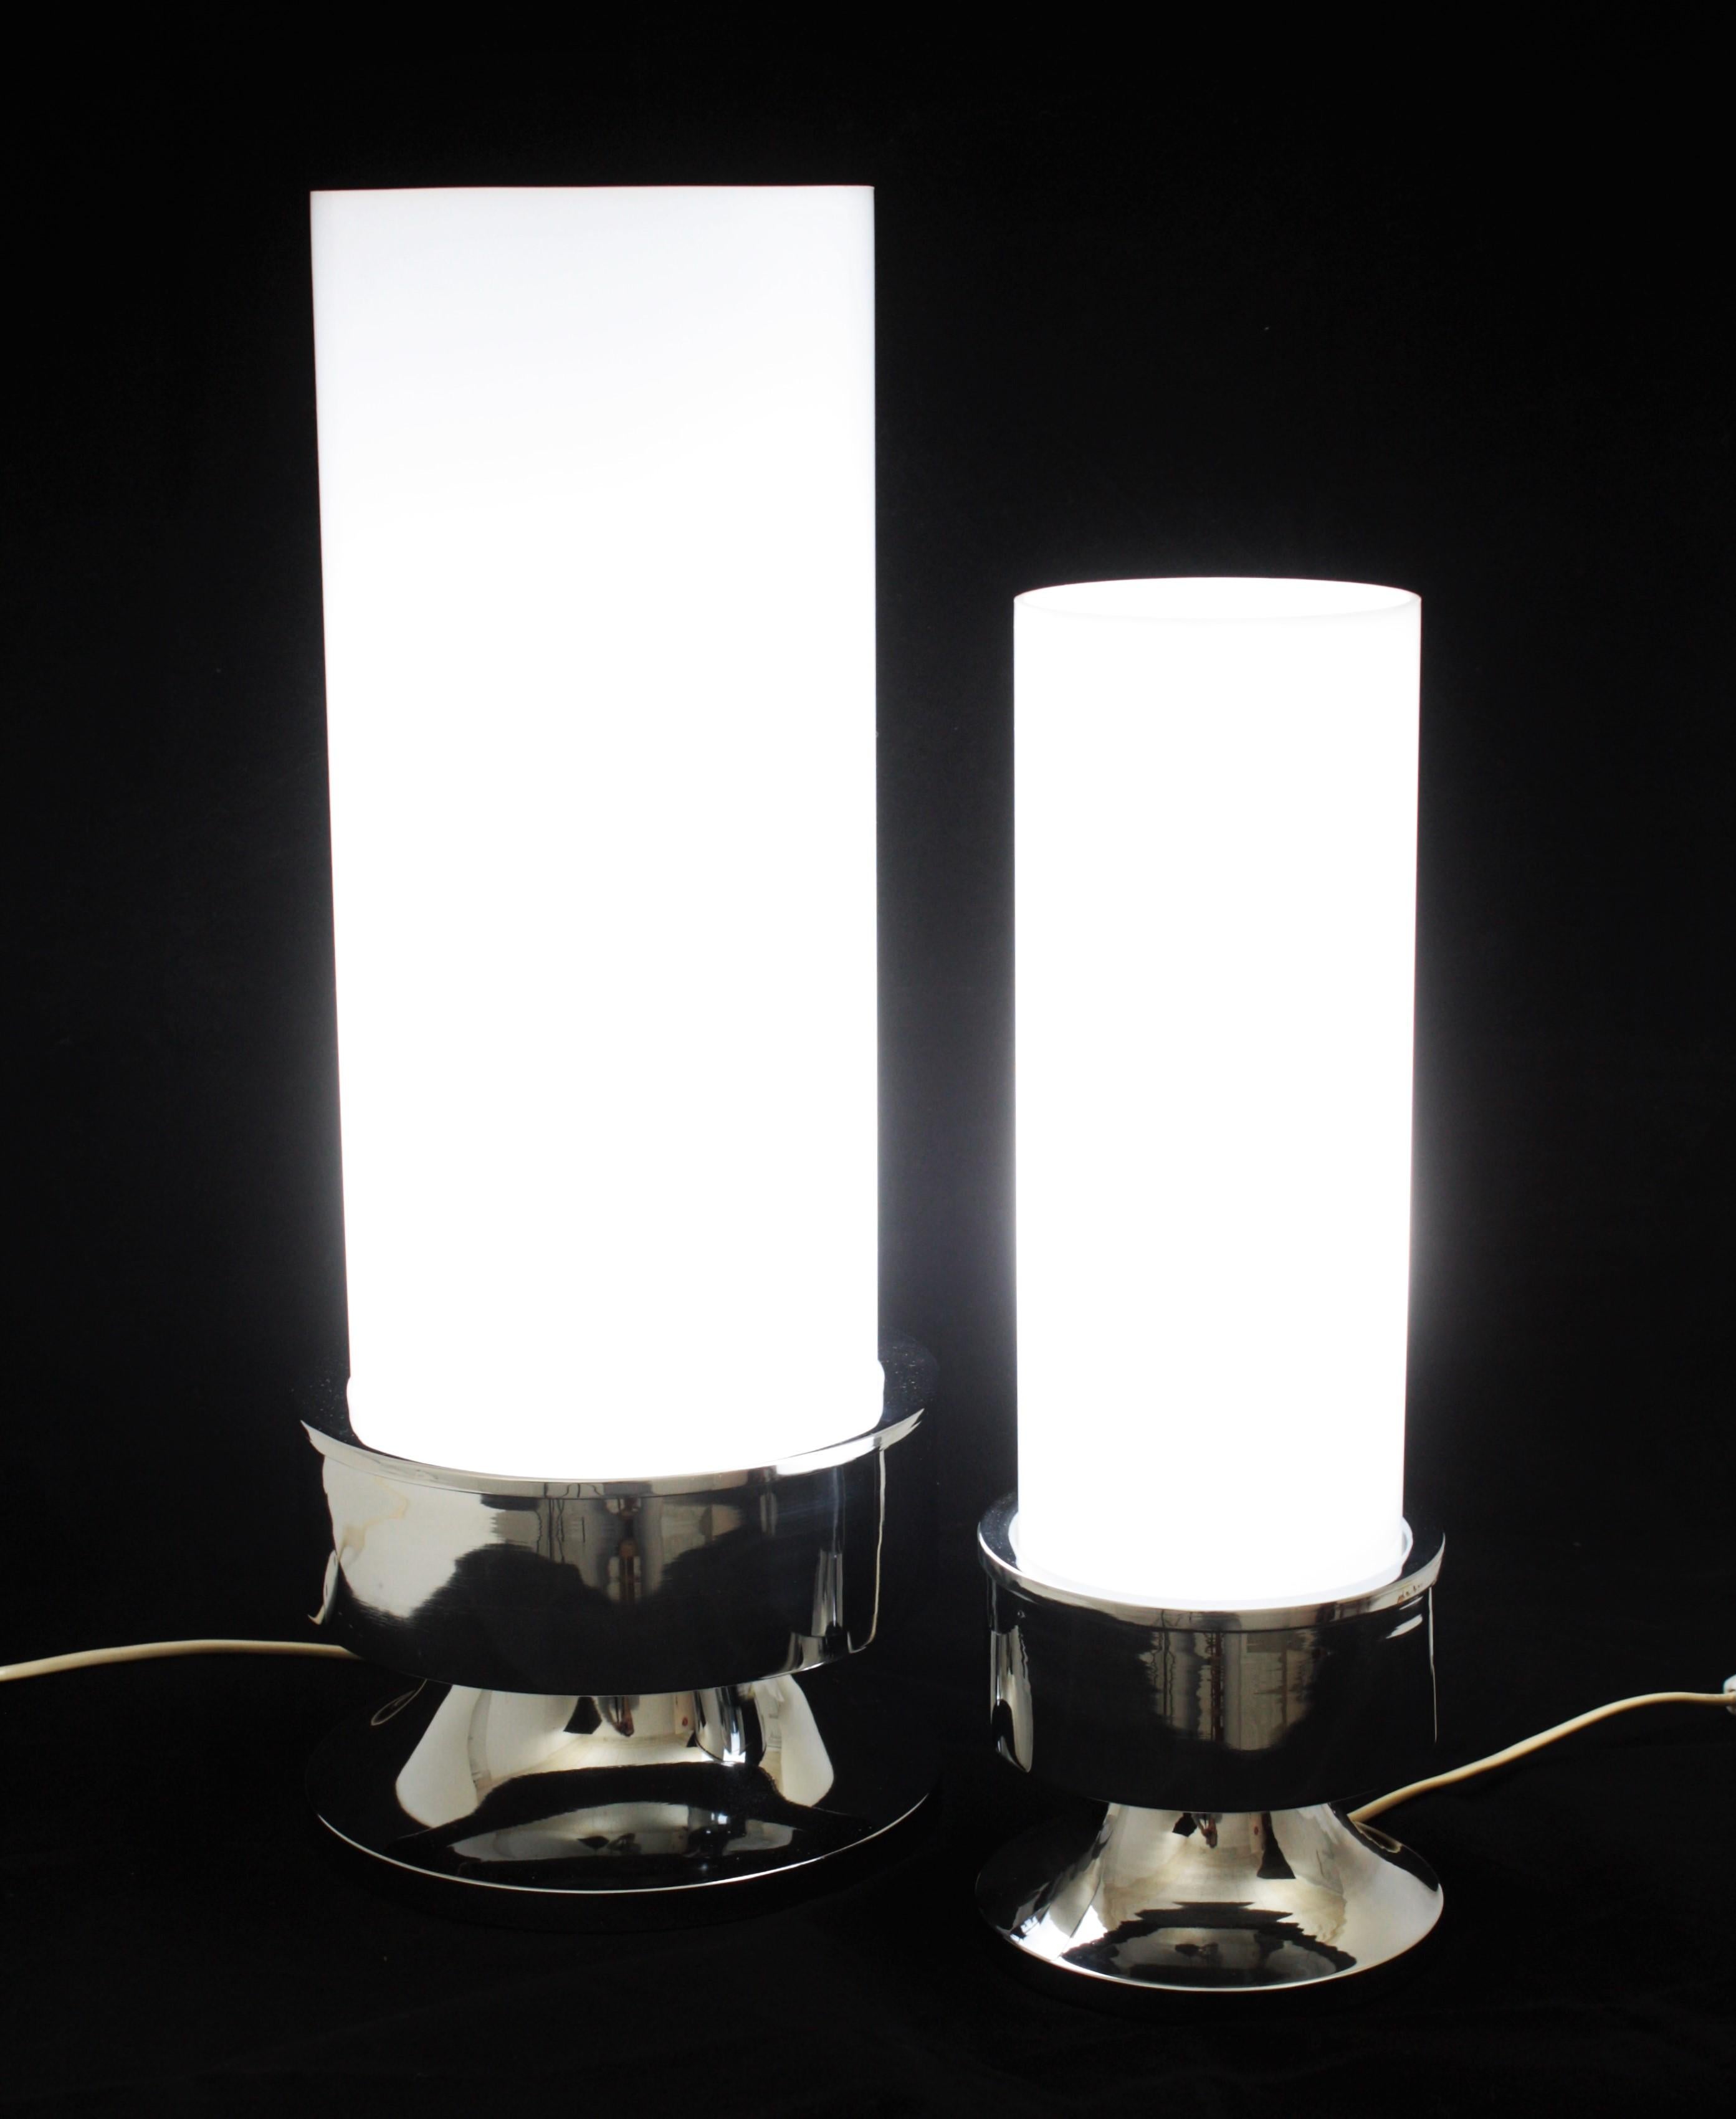 Set of Space Age design acrylic and chrome table lamps, Italy, 1960s.
The lamps feature a white acrylic cylindric shade standing up on a chromed steel base. One is larger than the other.
They are nice placed together or separately.
On sale as a